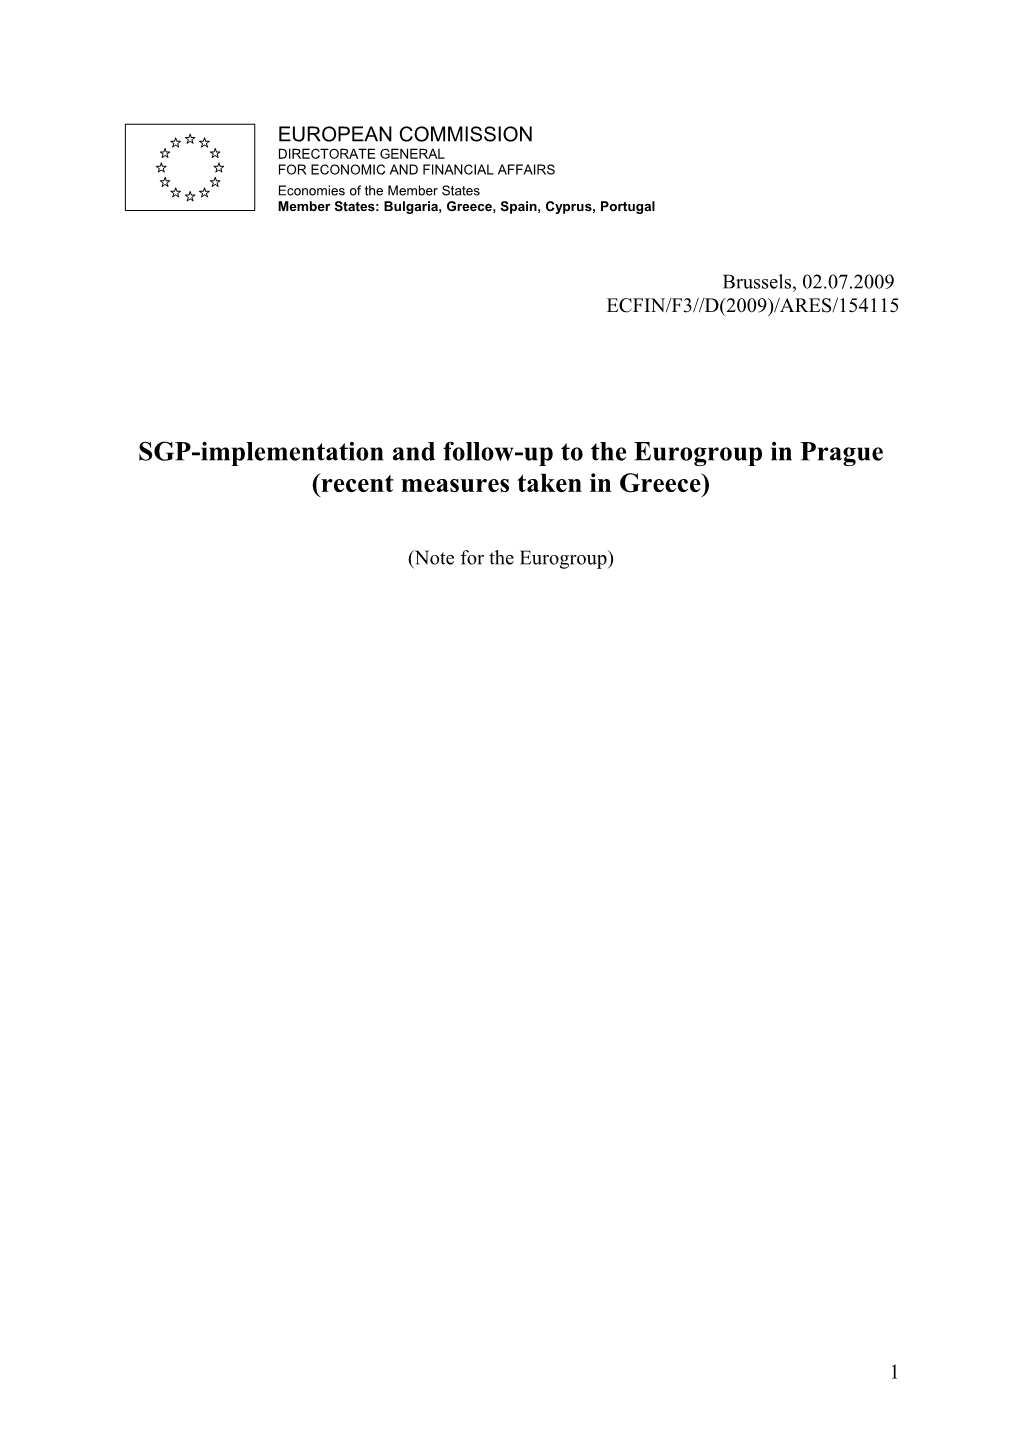 SGP-Implementation and Follow-Up to the Eurogroup in Prague (Recent Measures Taken in Greece)